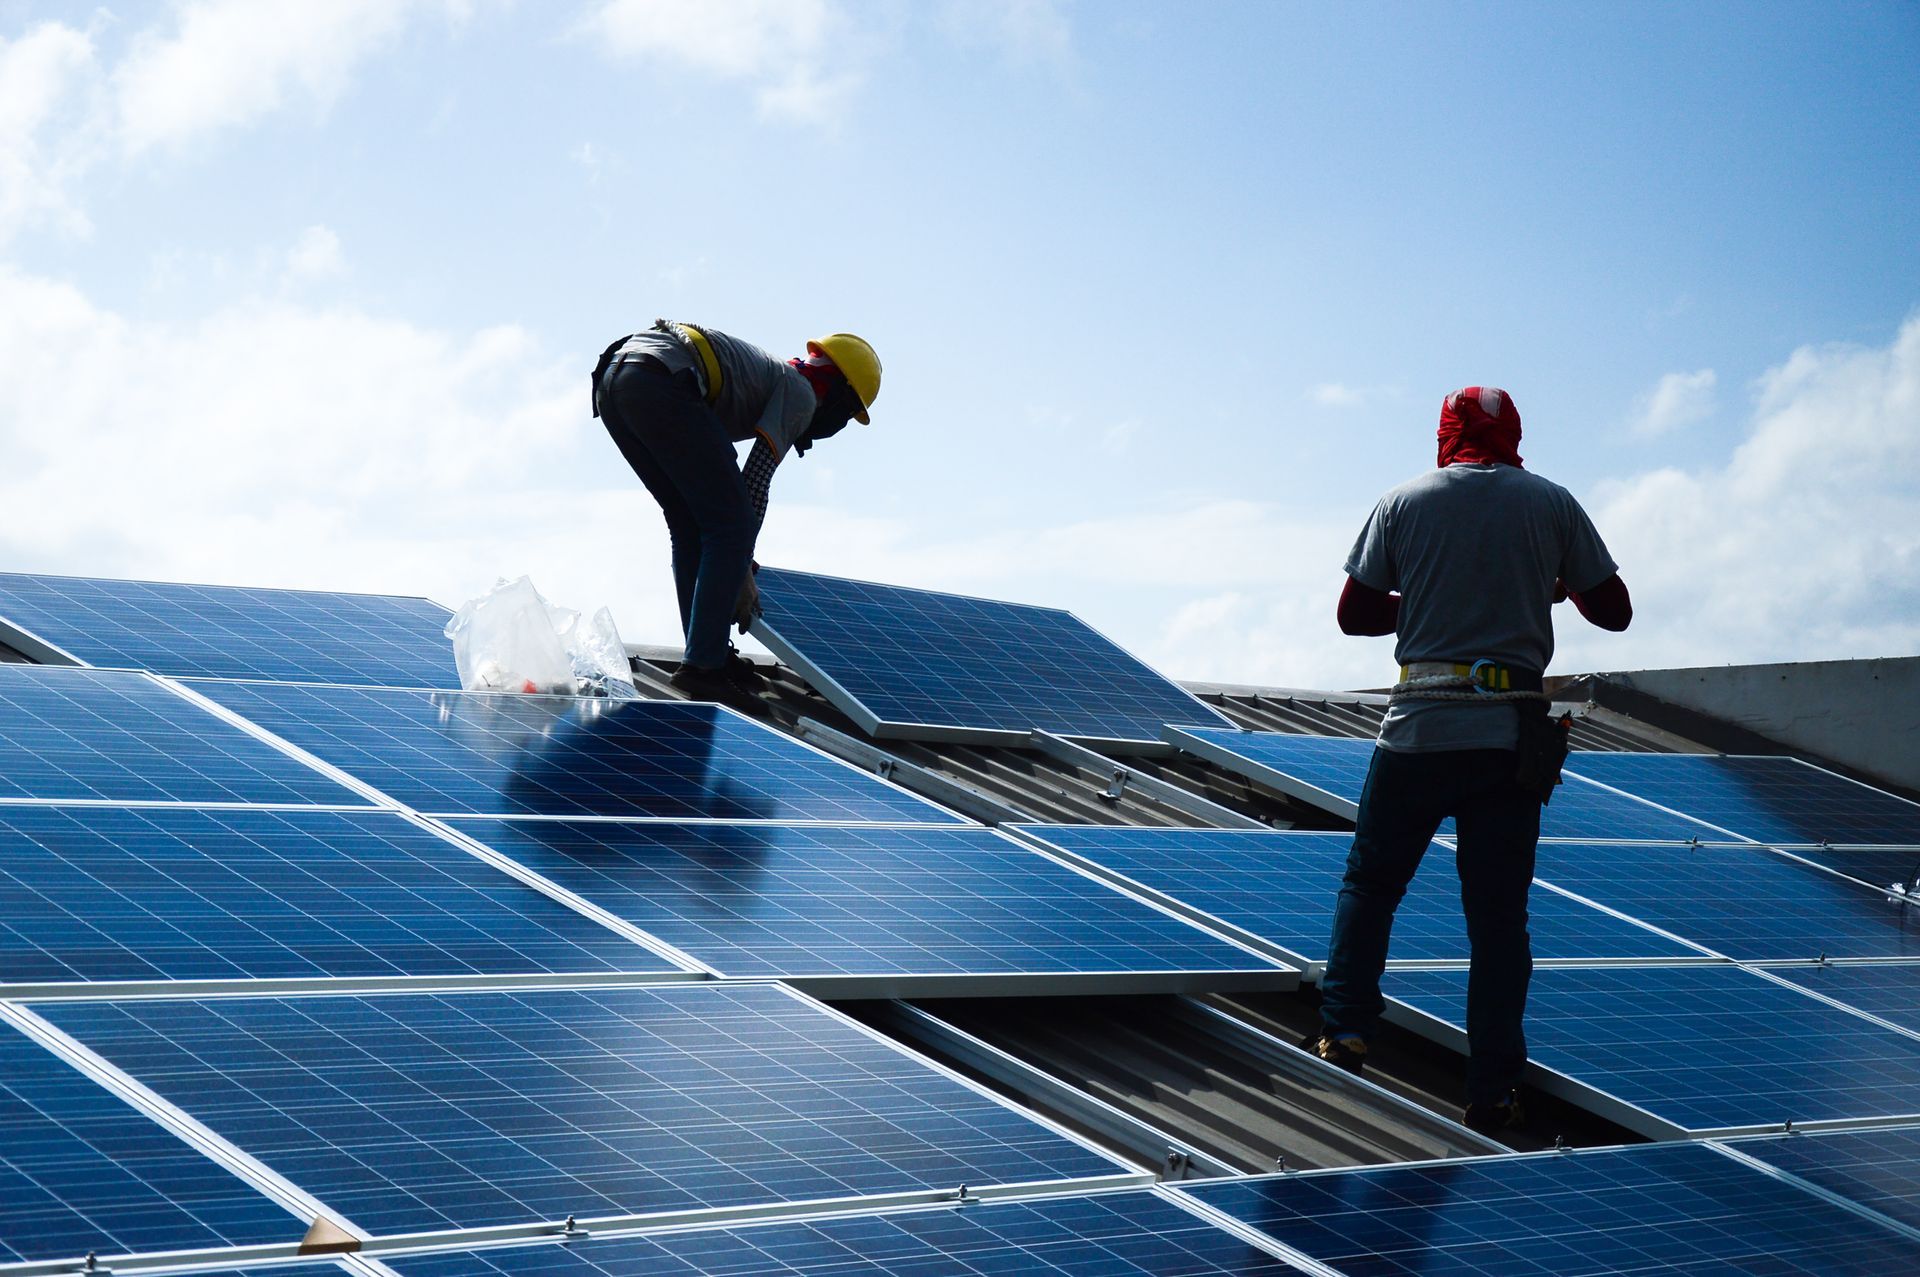 Two men are installing solar panels on the roof of a building.